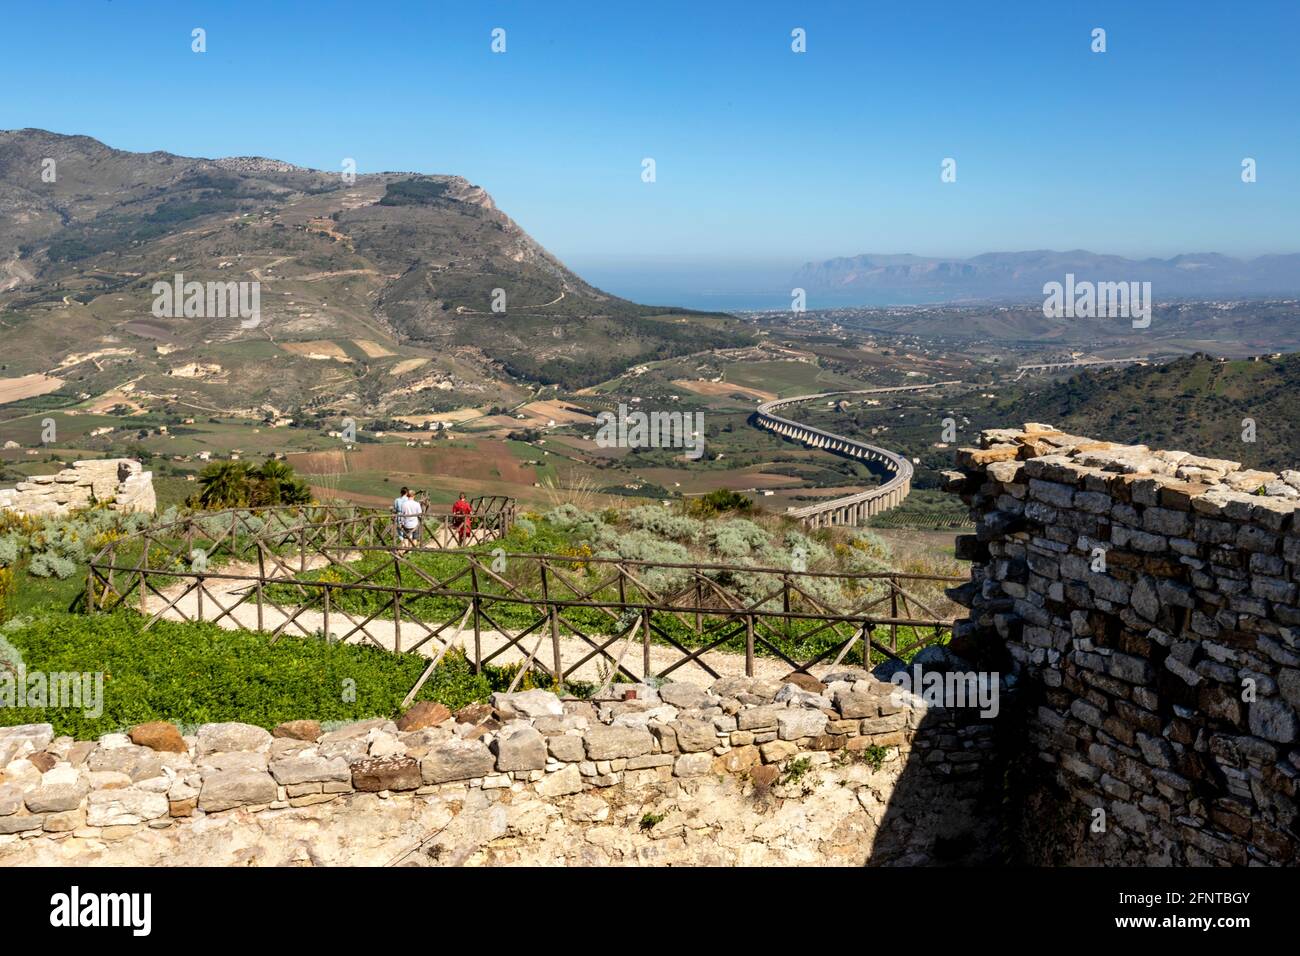 Tourists walking down the trail leading to the Greek theater of Segesta with view of the curved motorway, the Autostrada A29, Trapani, Sicily, Italy. Stock Photo